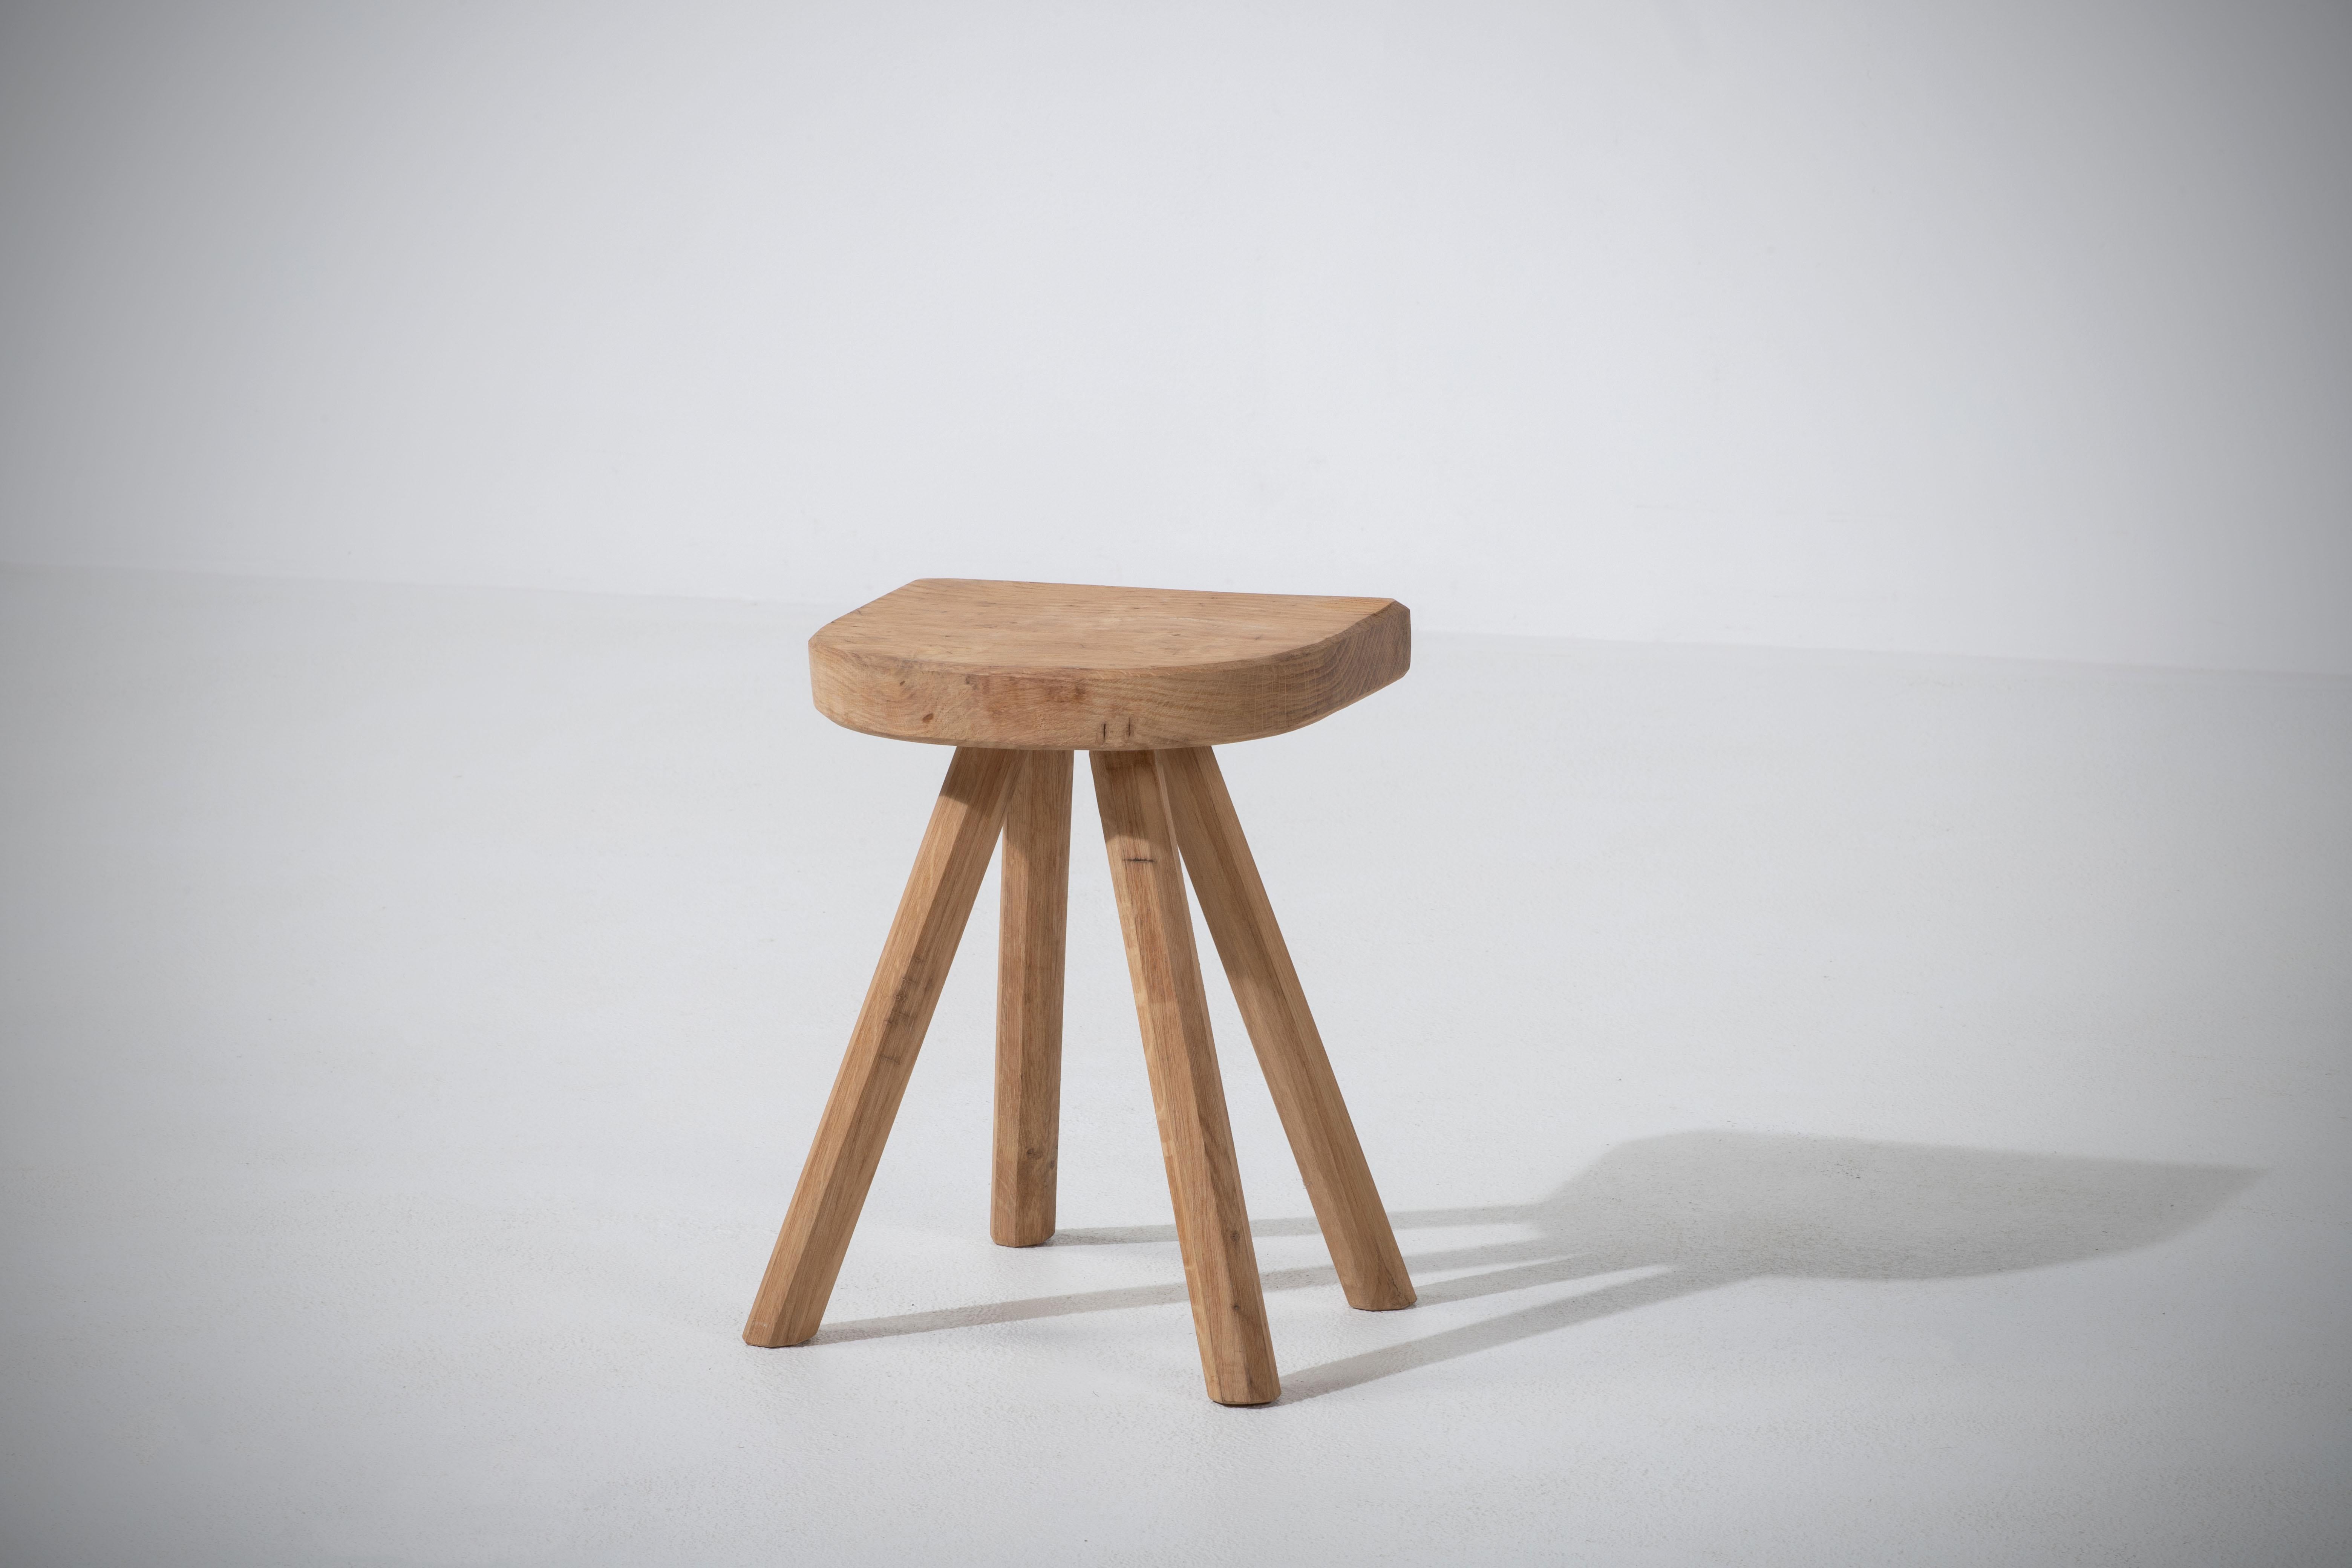 French Midcentury Oak Stool, Tripod Flared Feet, 1920s For Sale 1